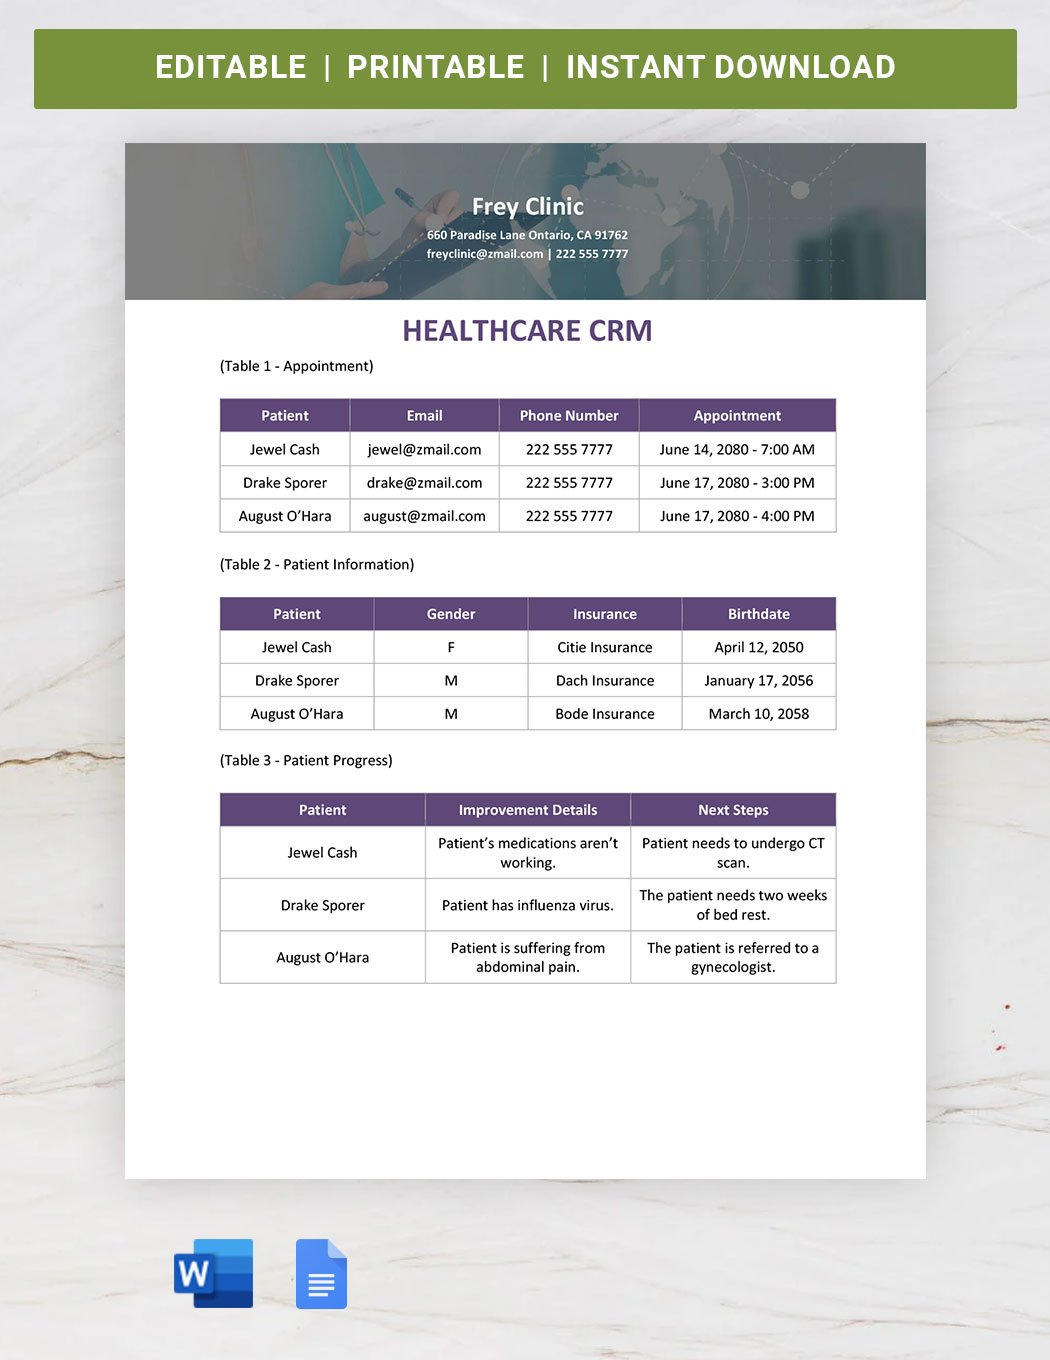 Healthcare CRM Template in Word, Google Docs